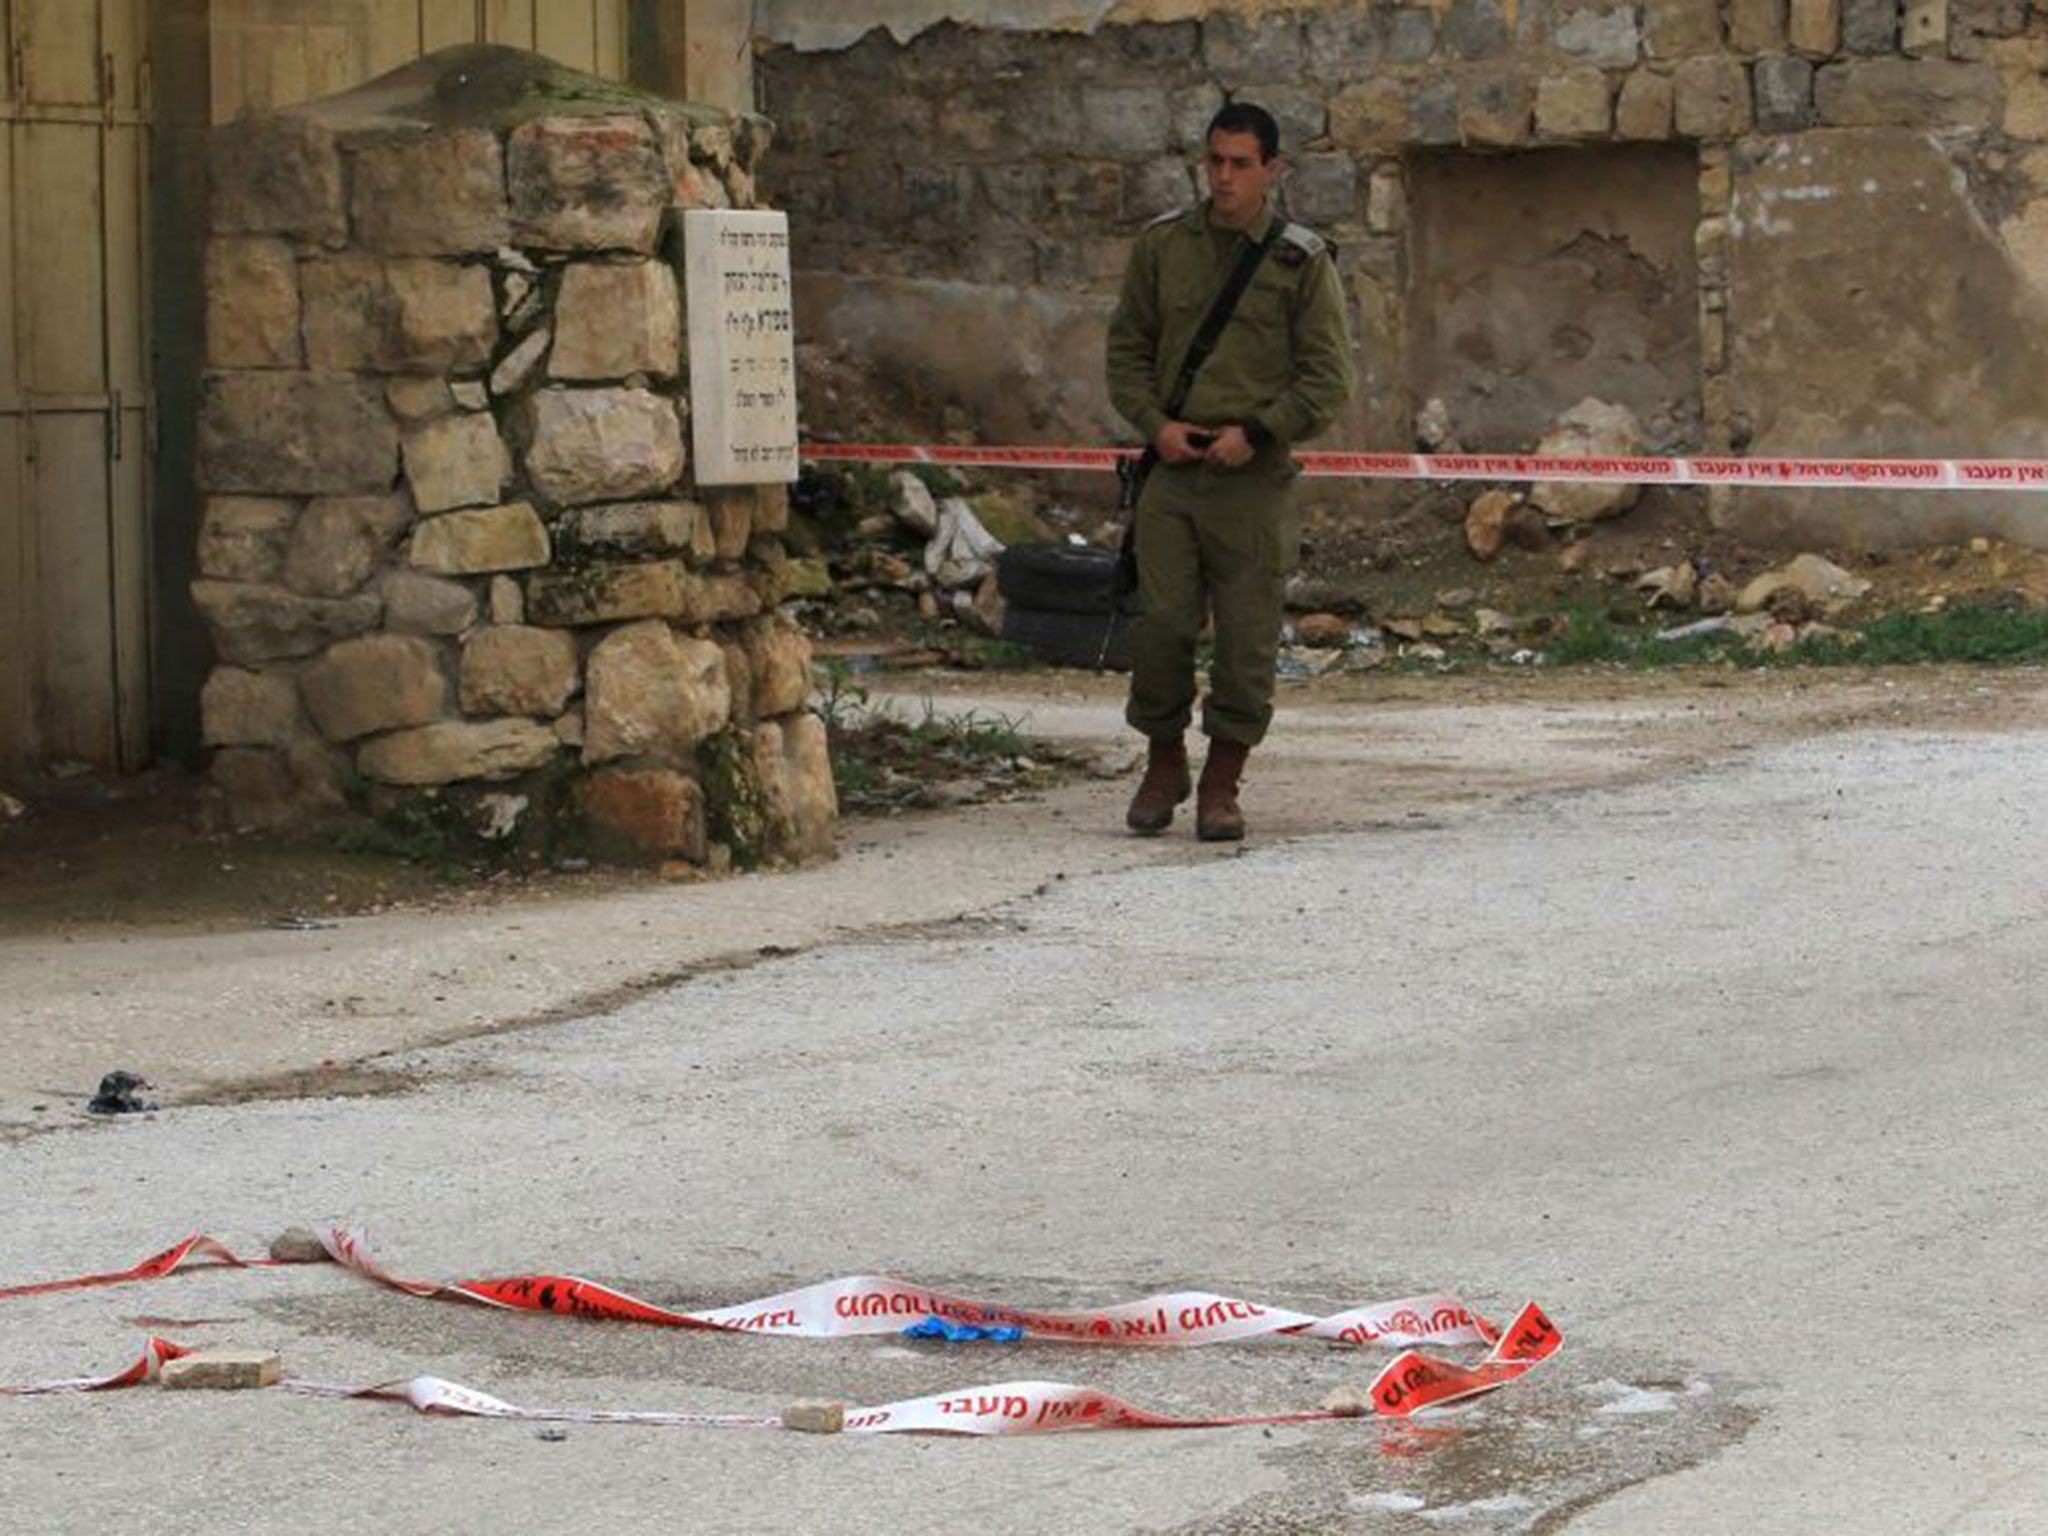 An Israeli security forces members monitors the site where a Palestinian woman tried to stab an Israeli soldier before being shot dead, in the Israeli occupied West Bank city of Hebron, on February 13, 2016.